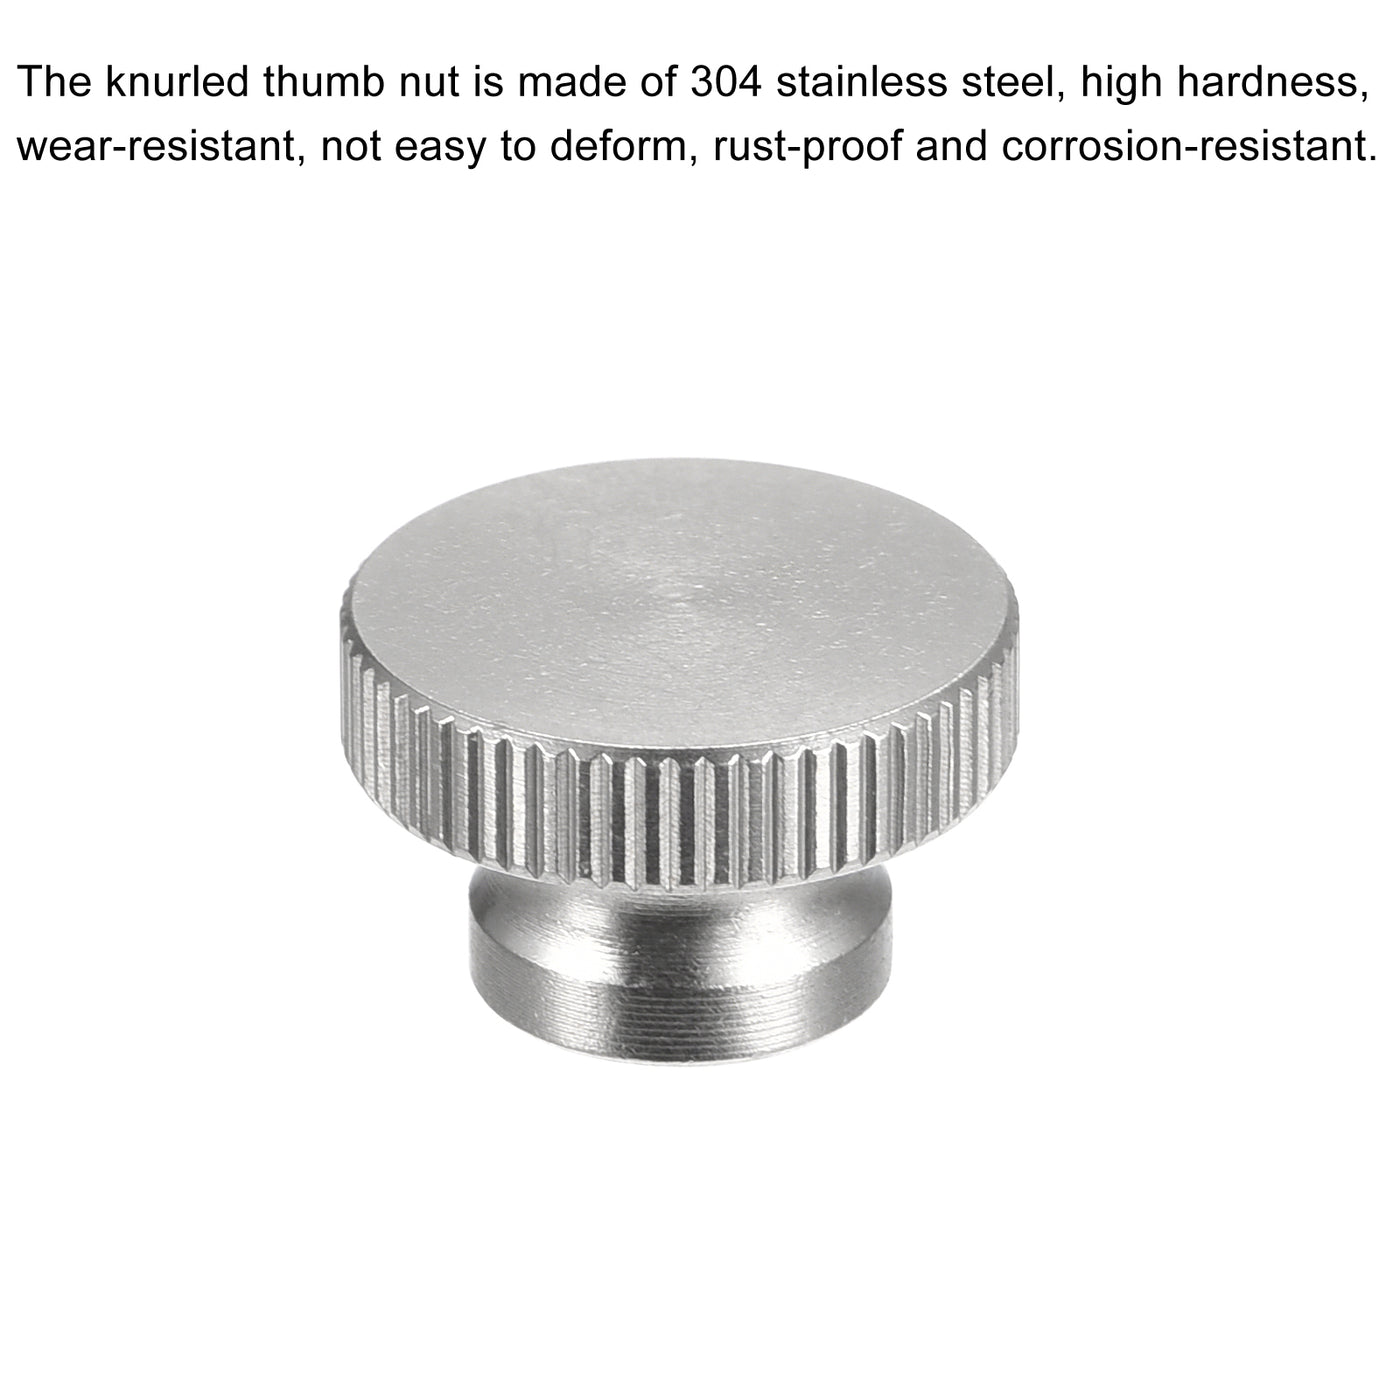 uxcell Uxcell Knurled Thumb Nuts, 5pcs M5 x D16mm x H10mm 304 Stainless Steel Blind Hole Nuts